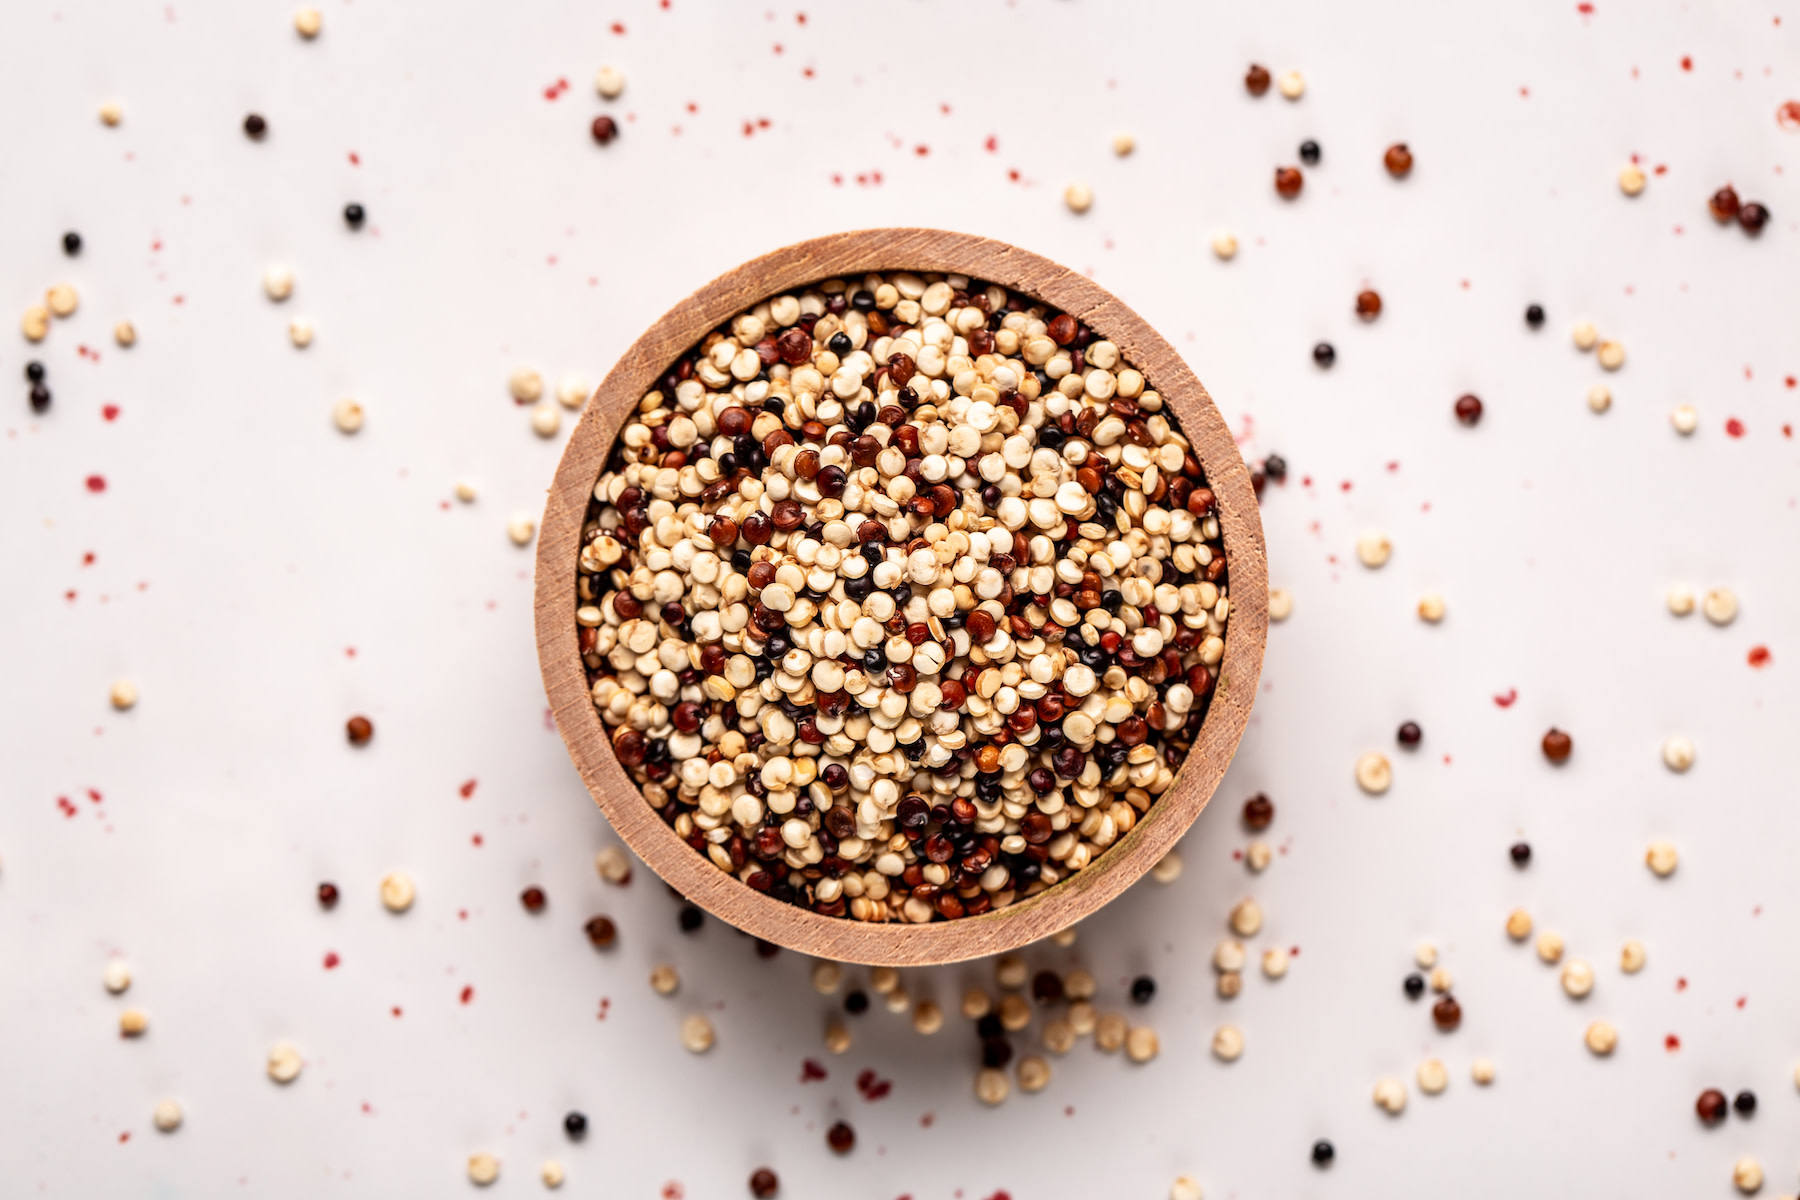 High-Fiber Foods: A bowl of uncooked quinoa against a white background.